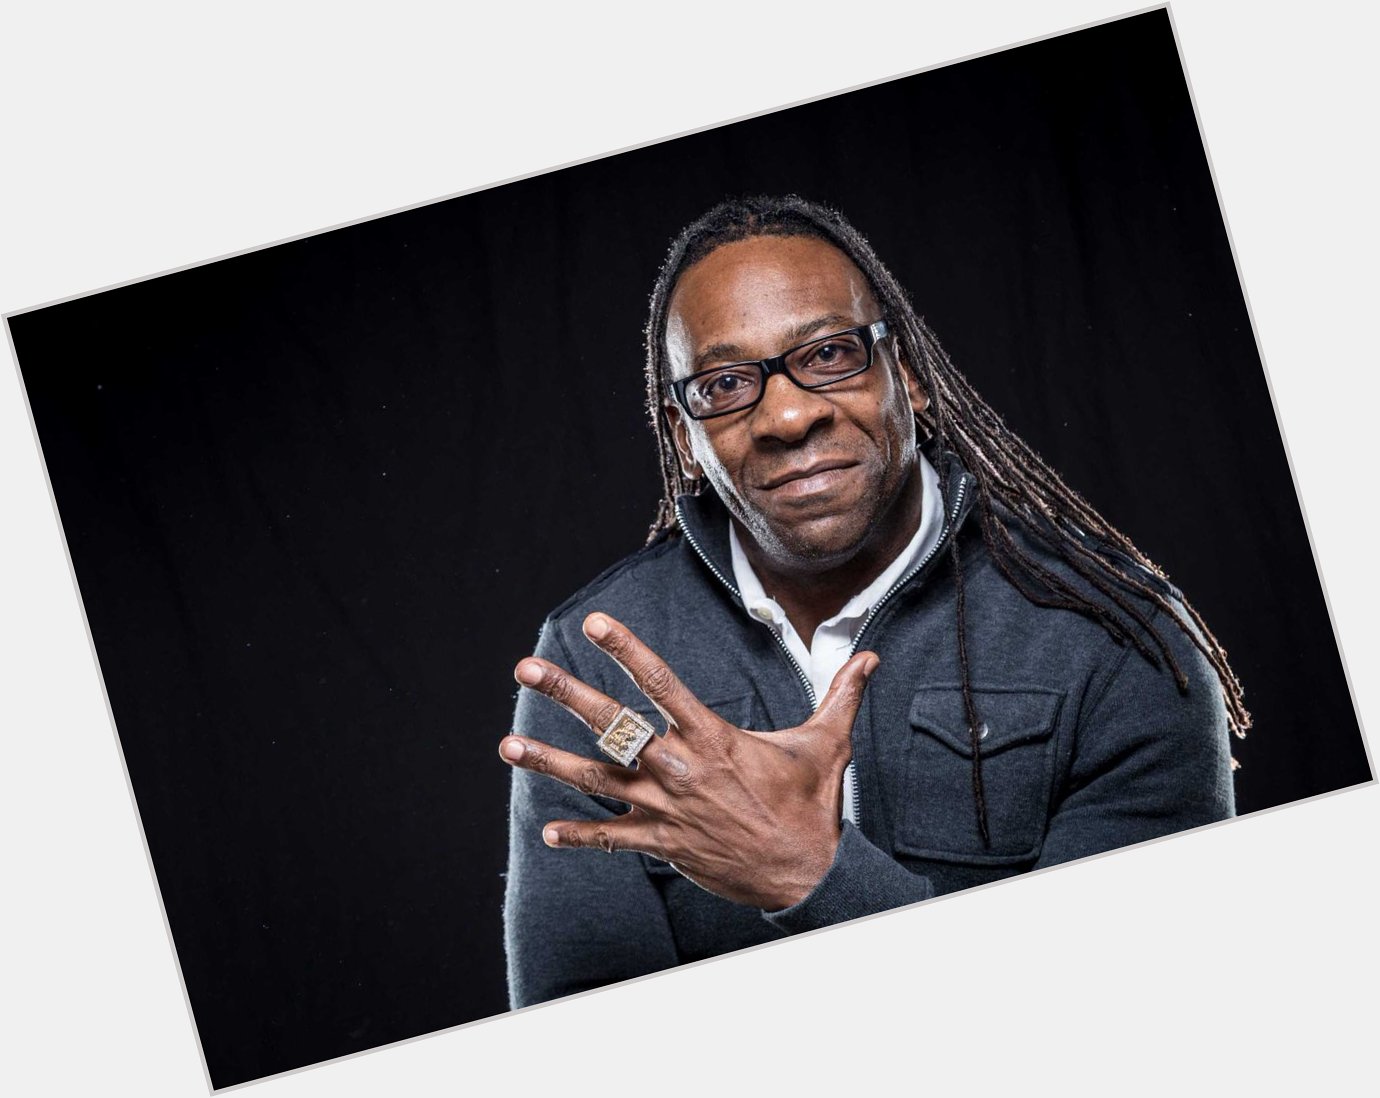 Happy Birthday to WWE Hall of Famer Booker T who turns 52 today! 